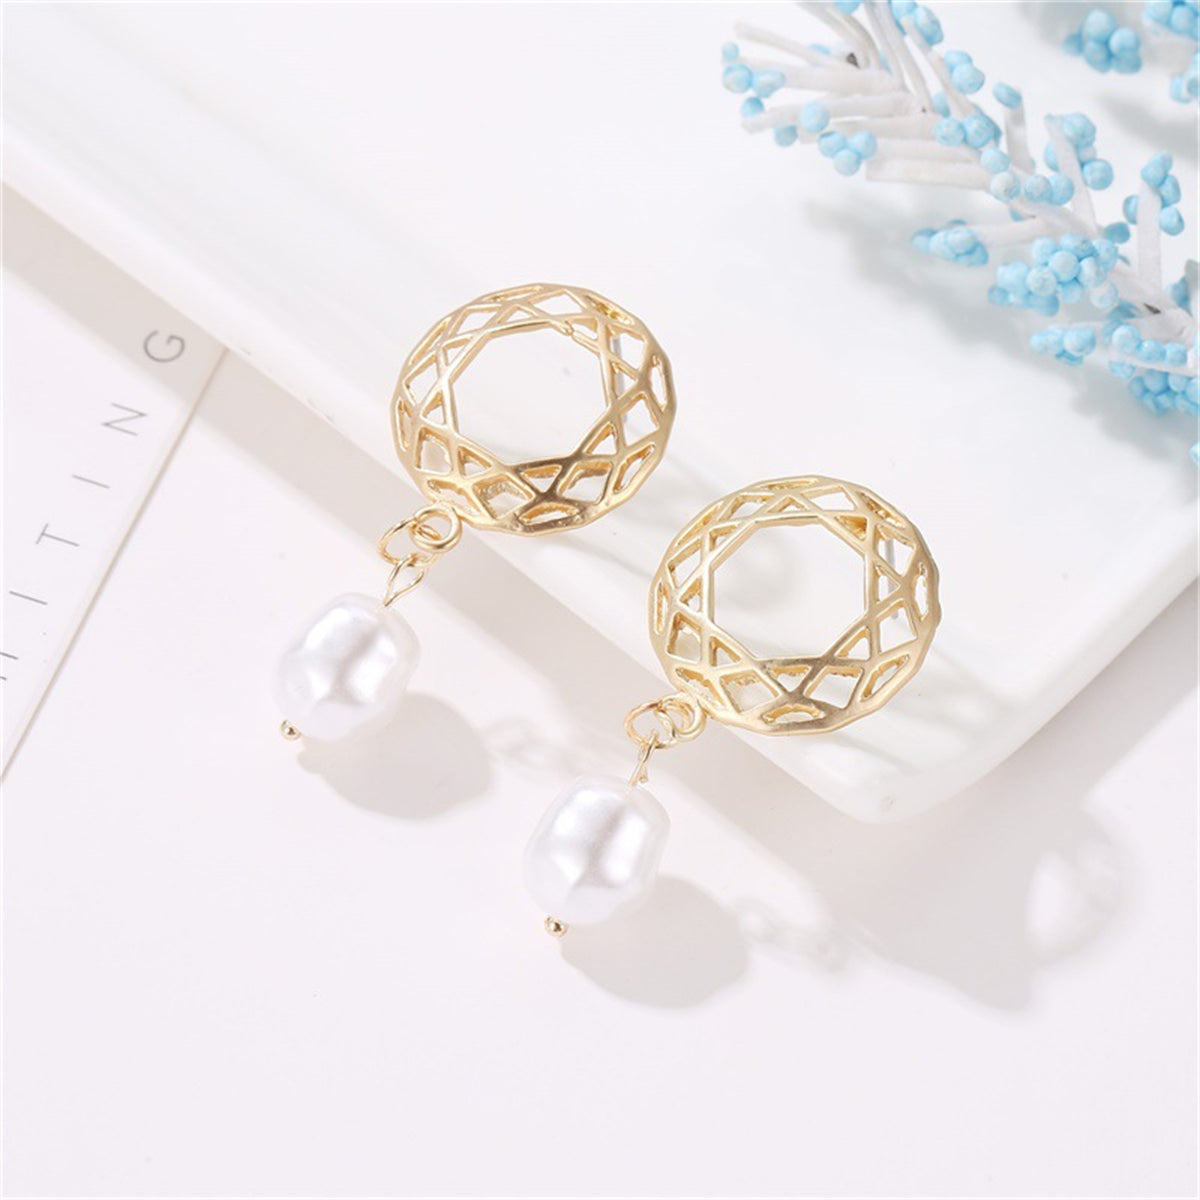 Pearl & 18K Gold-Plated Round Drop Earrings